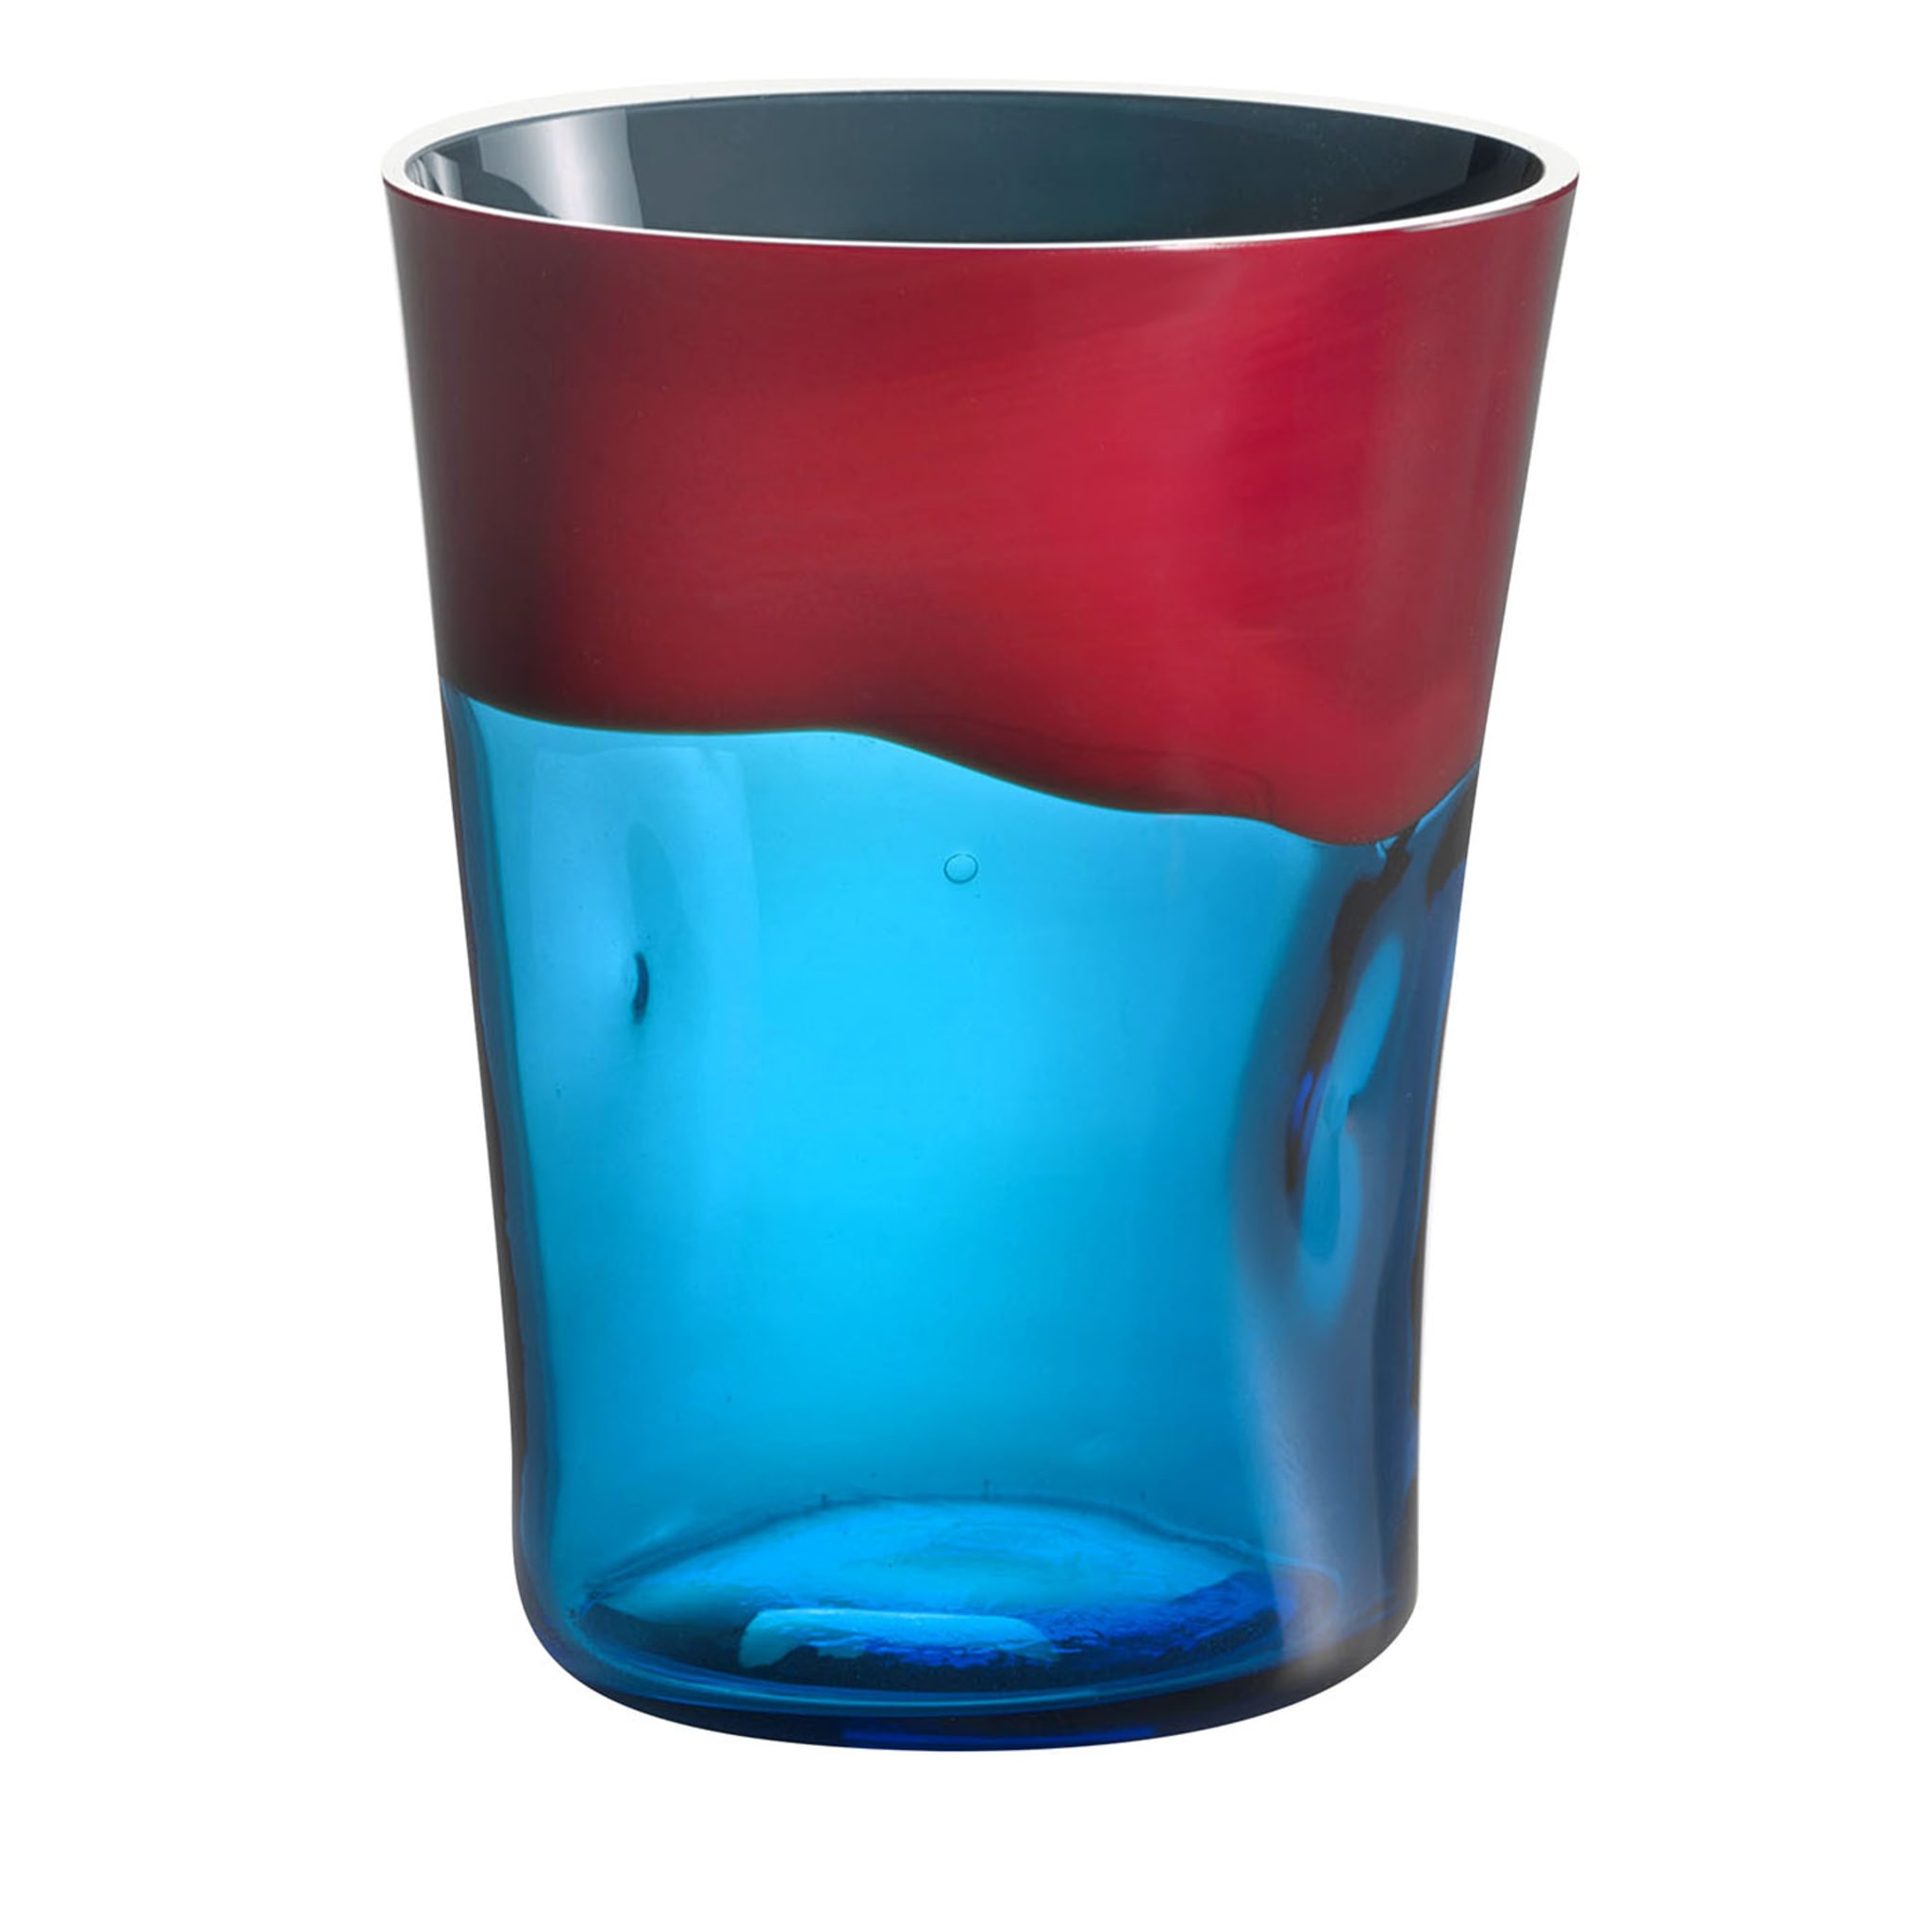 Dandy Red & Turquoise Glass by Stefano Marcato - Main view